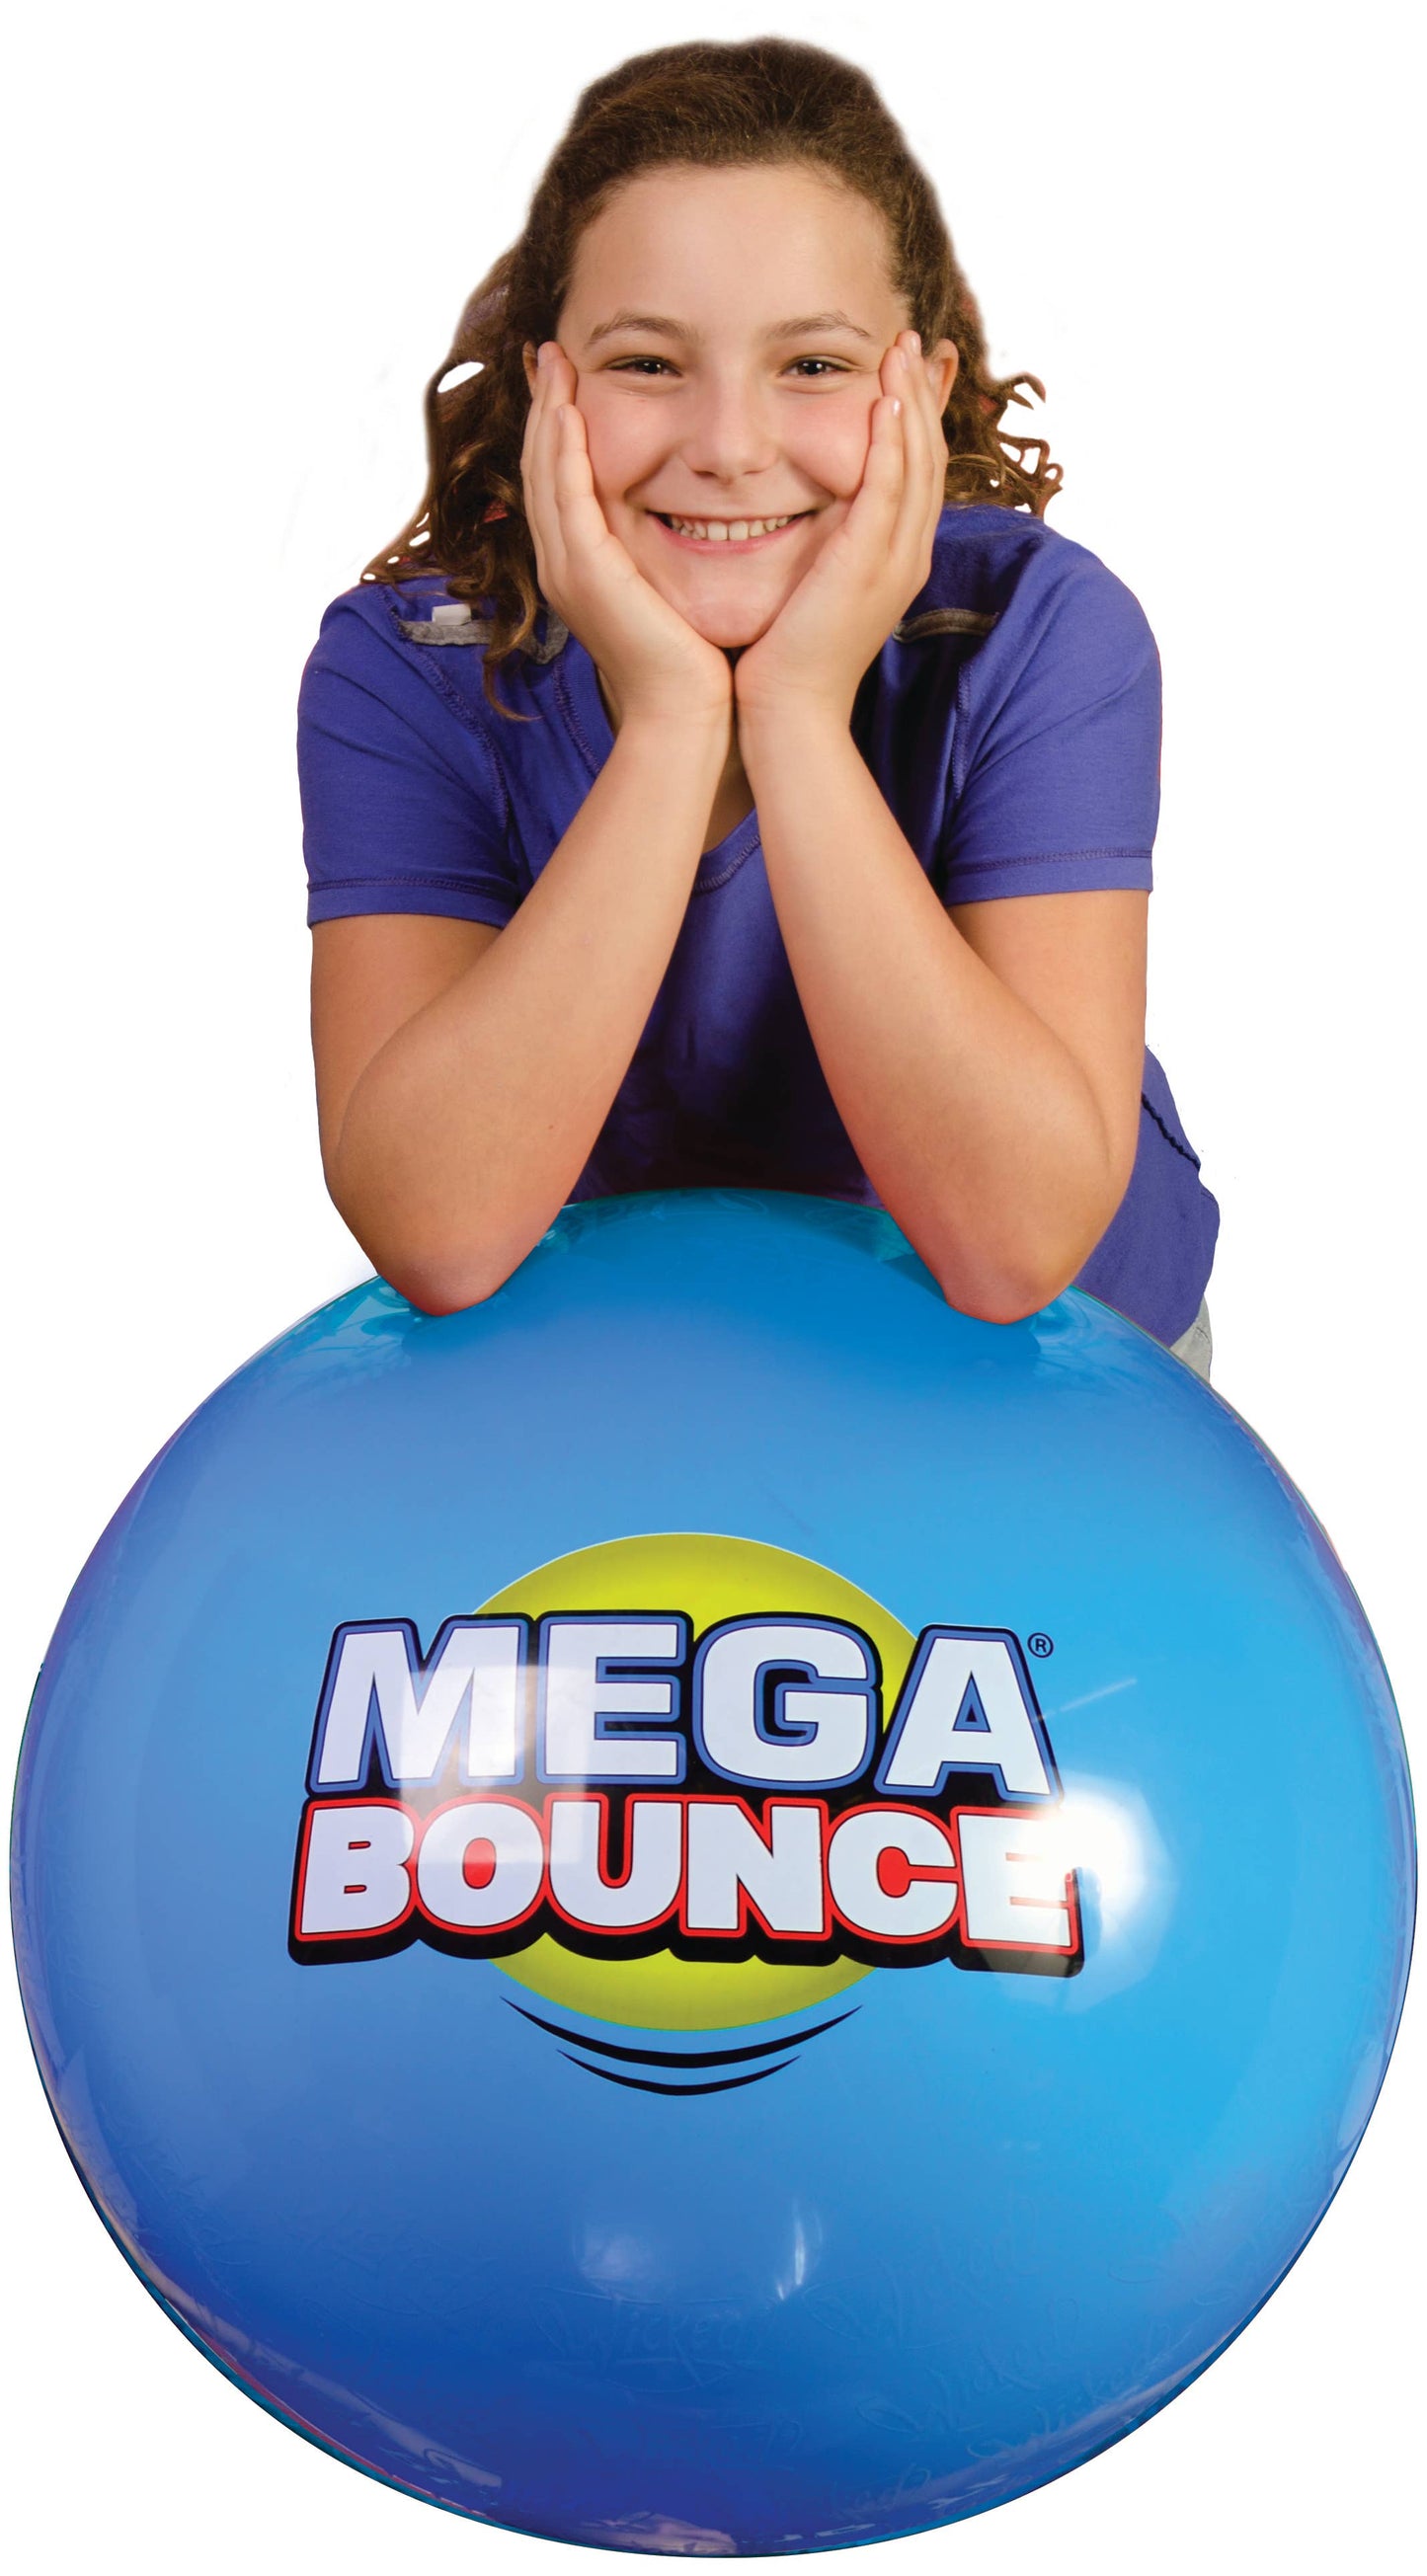 Wicked Mega- The World's Bounciest Inflatable Ball